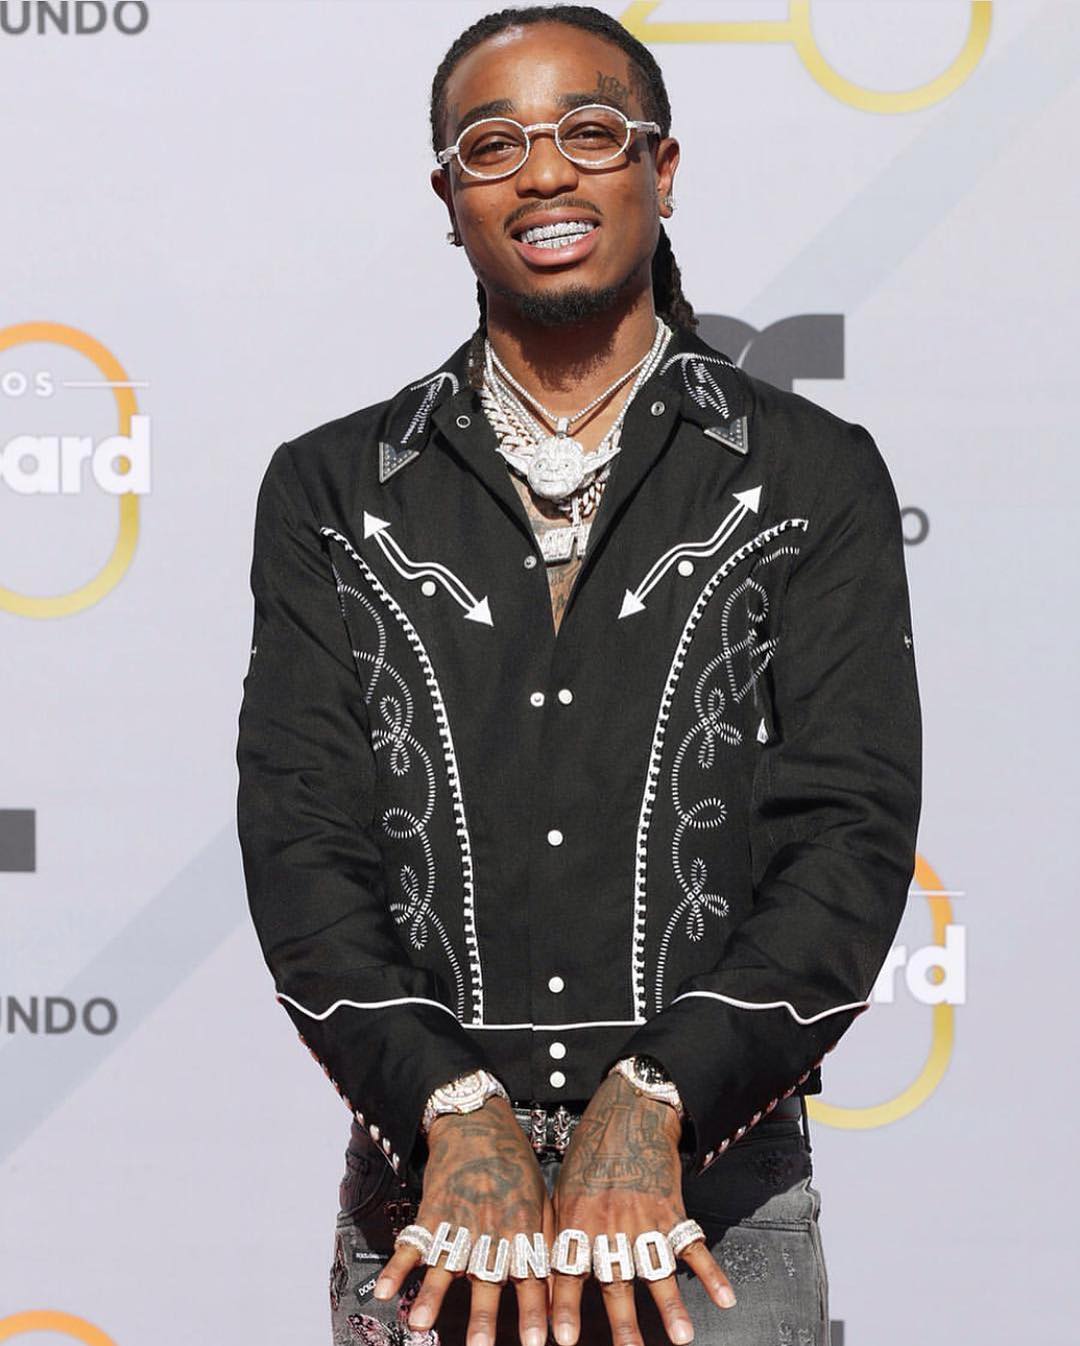 SPOTTED: Quavo in Dolce & Gabbana at the Billboard Latin Music Awards